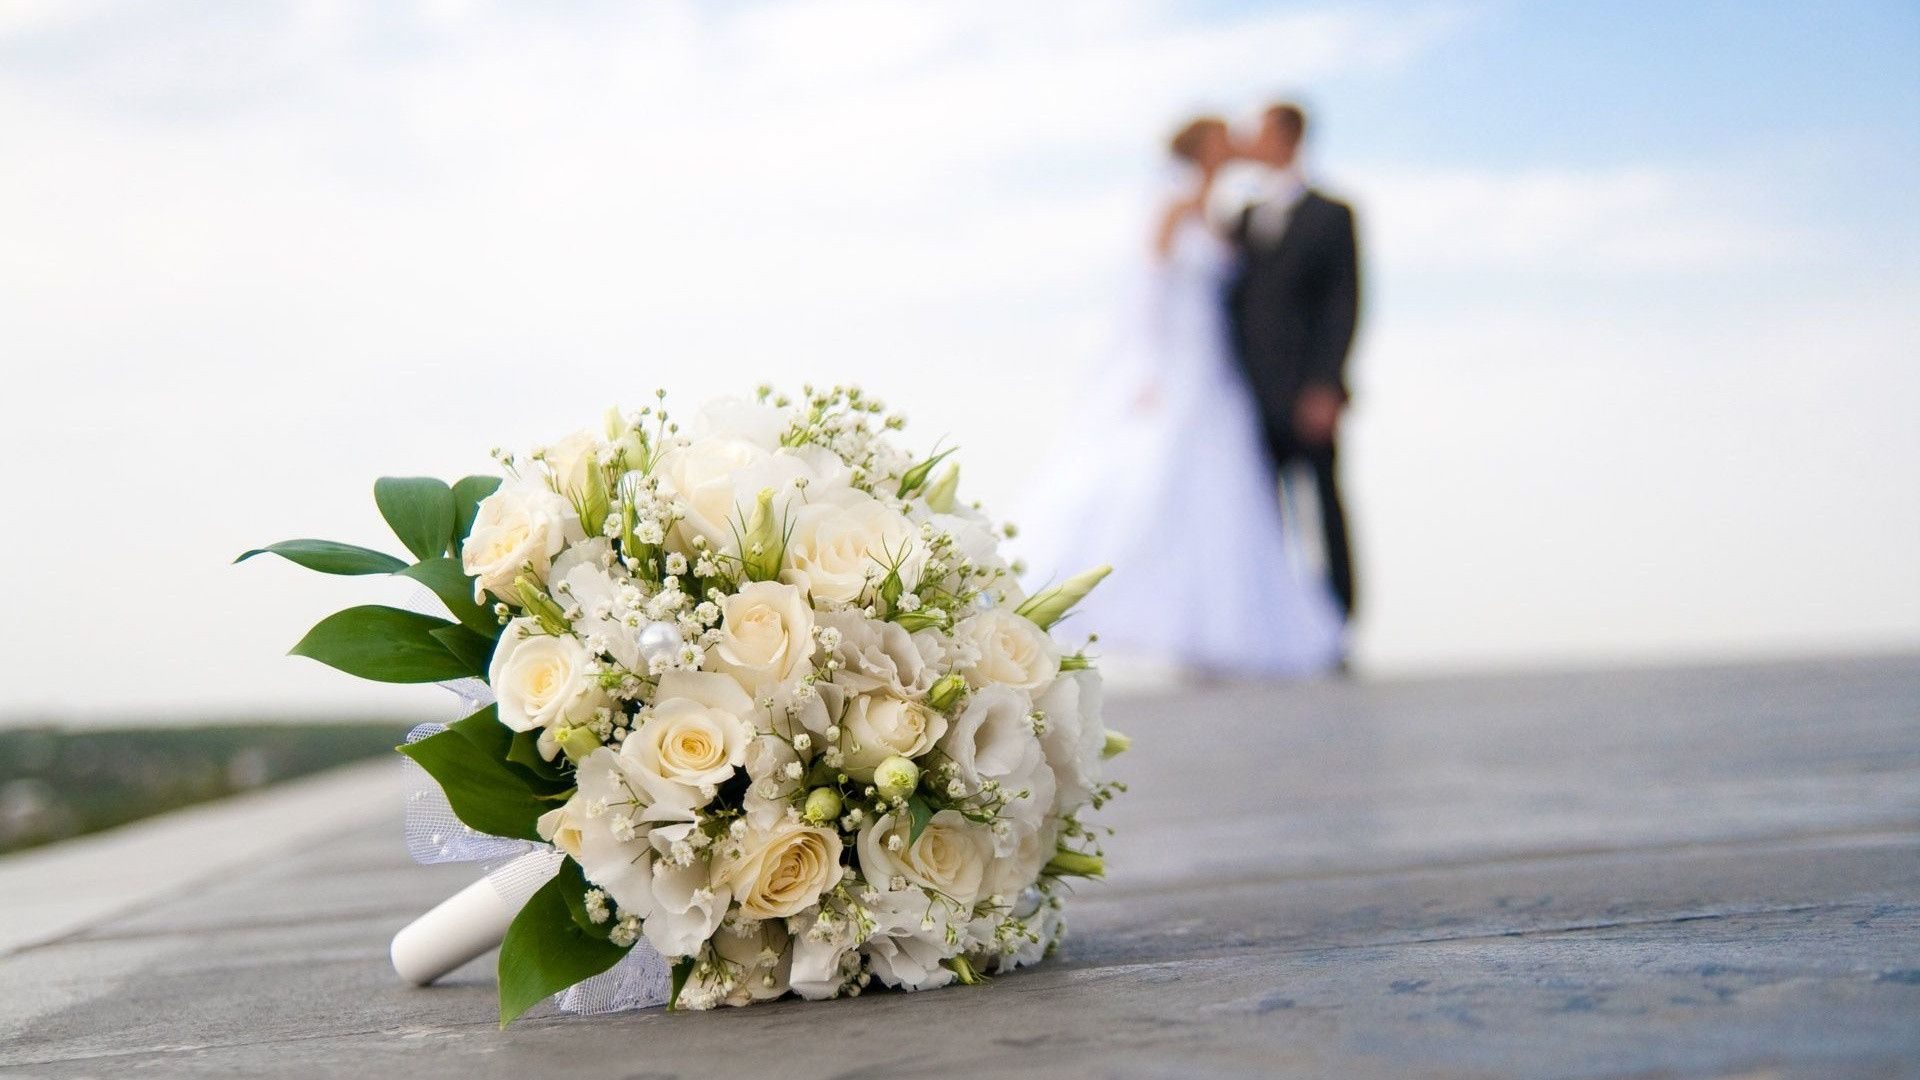 Best Wedding Services You Can Find Online